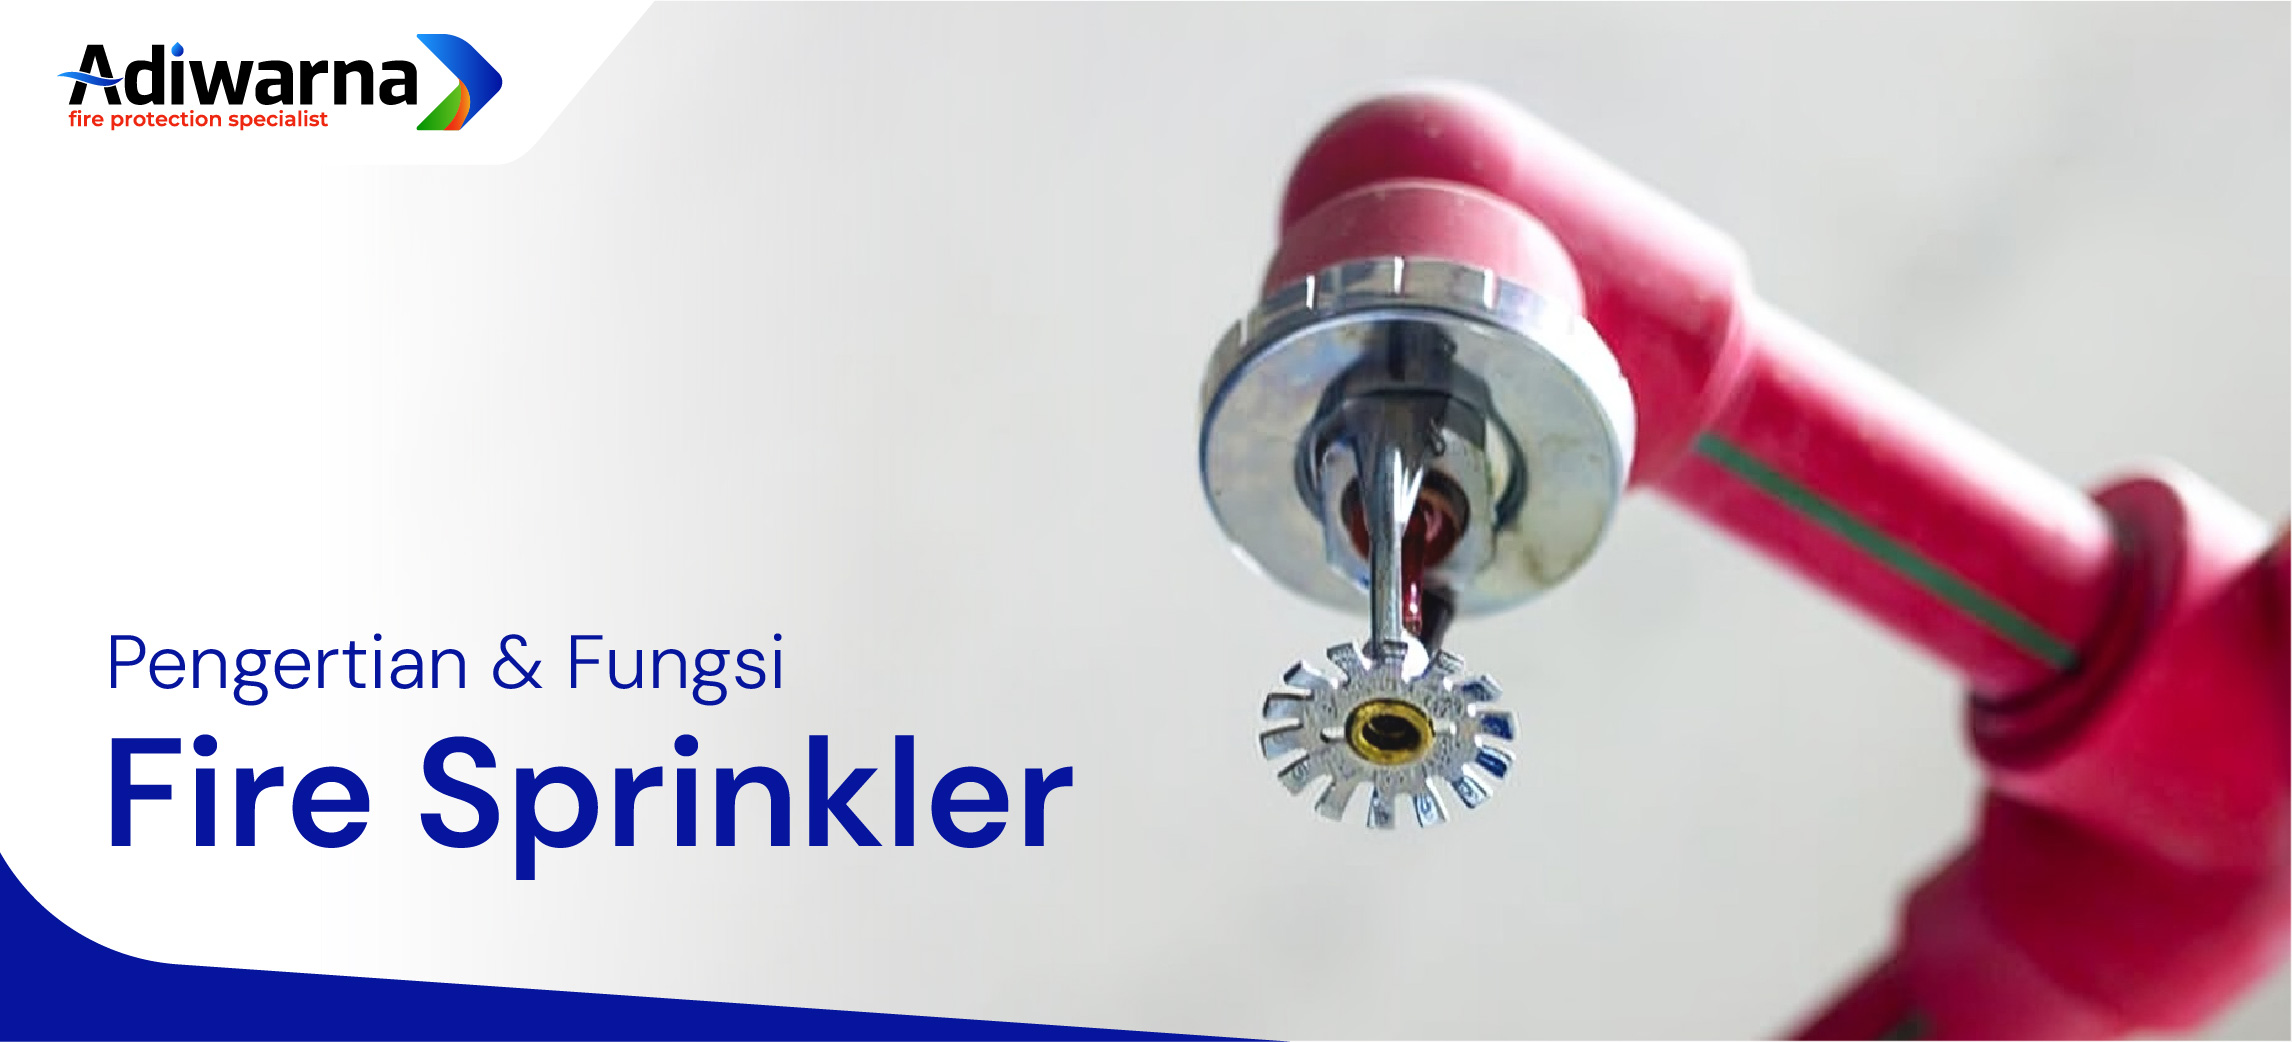 What is Fire Sprinkler ?